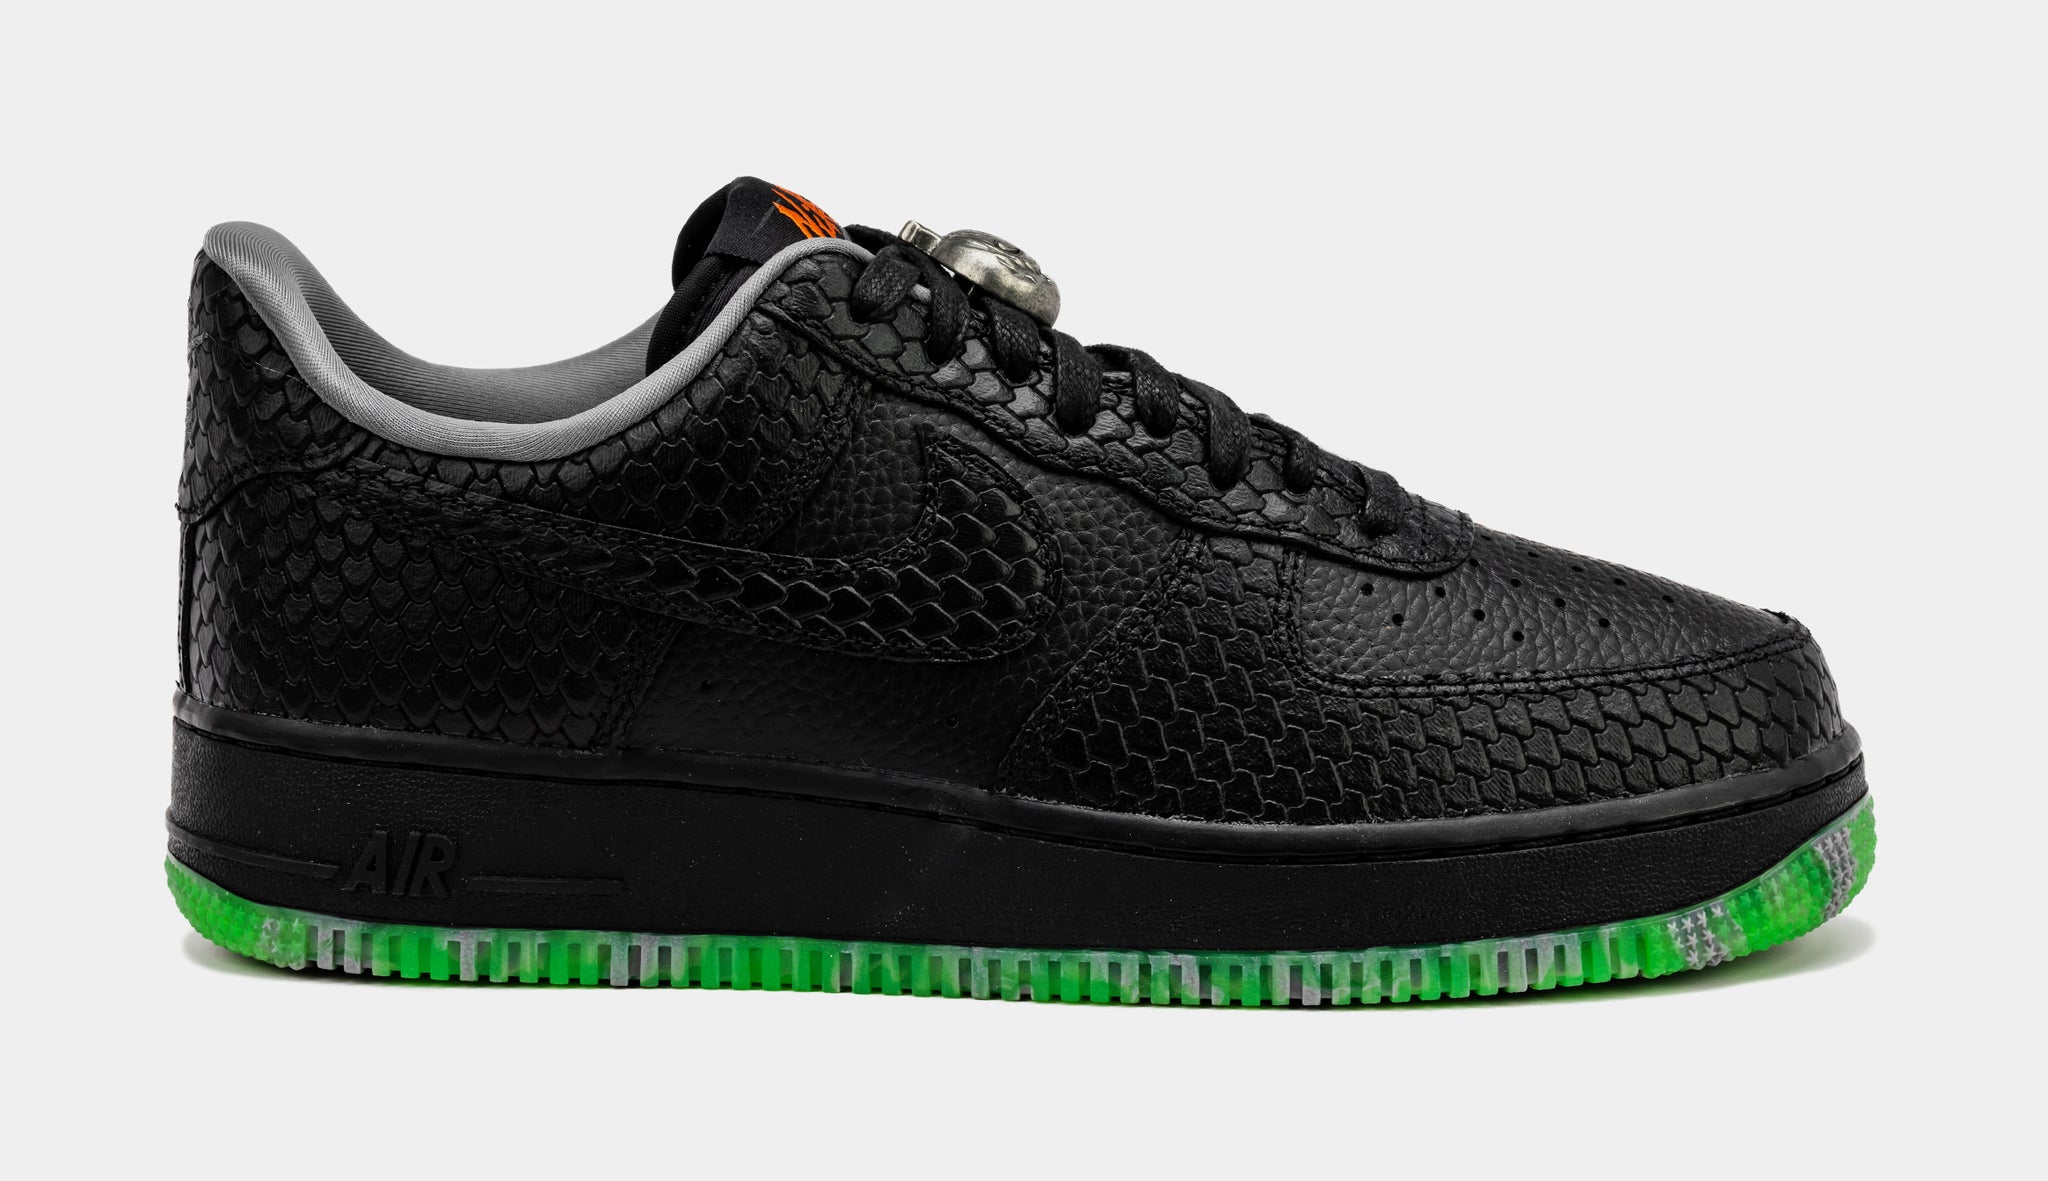 Nike Air Force 1 Low Halloween Mens Lifestyle Shoes Black Green